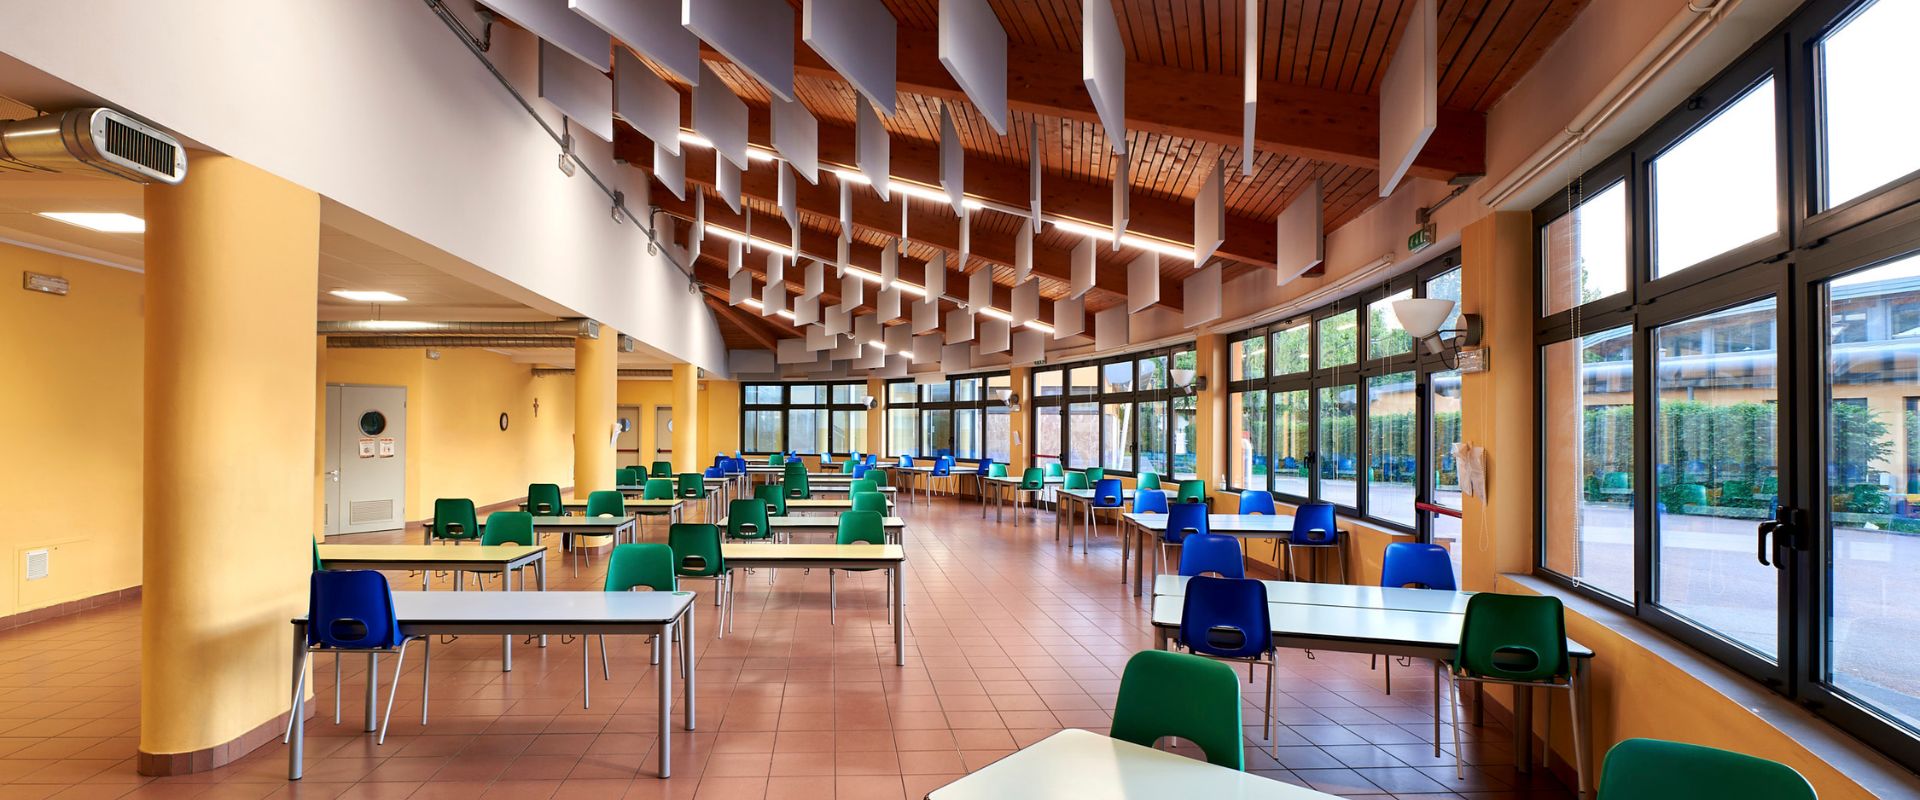 A scalable school lighting package from TRILUX